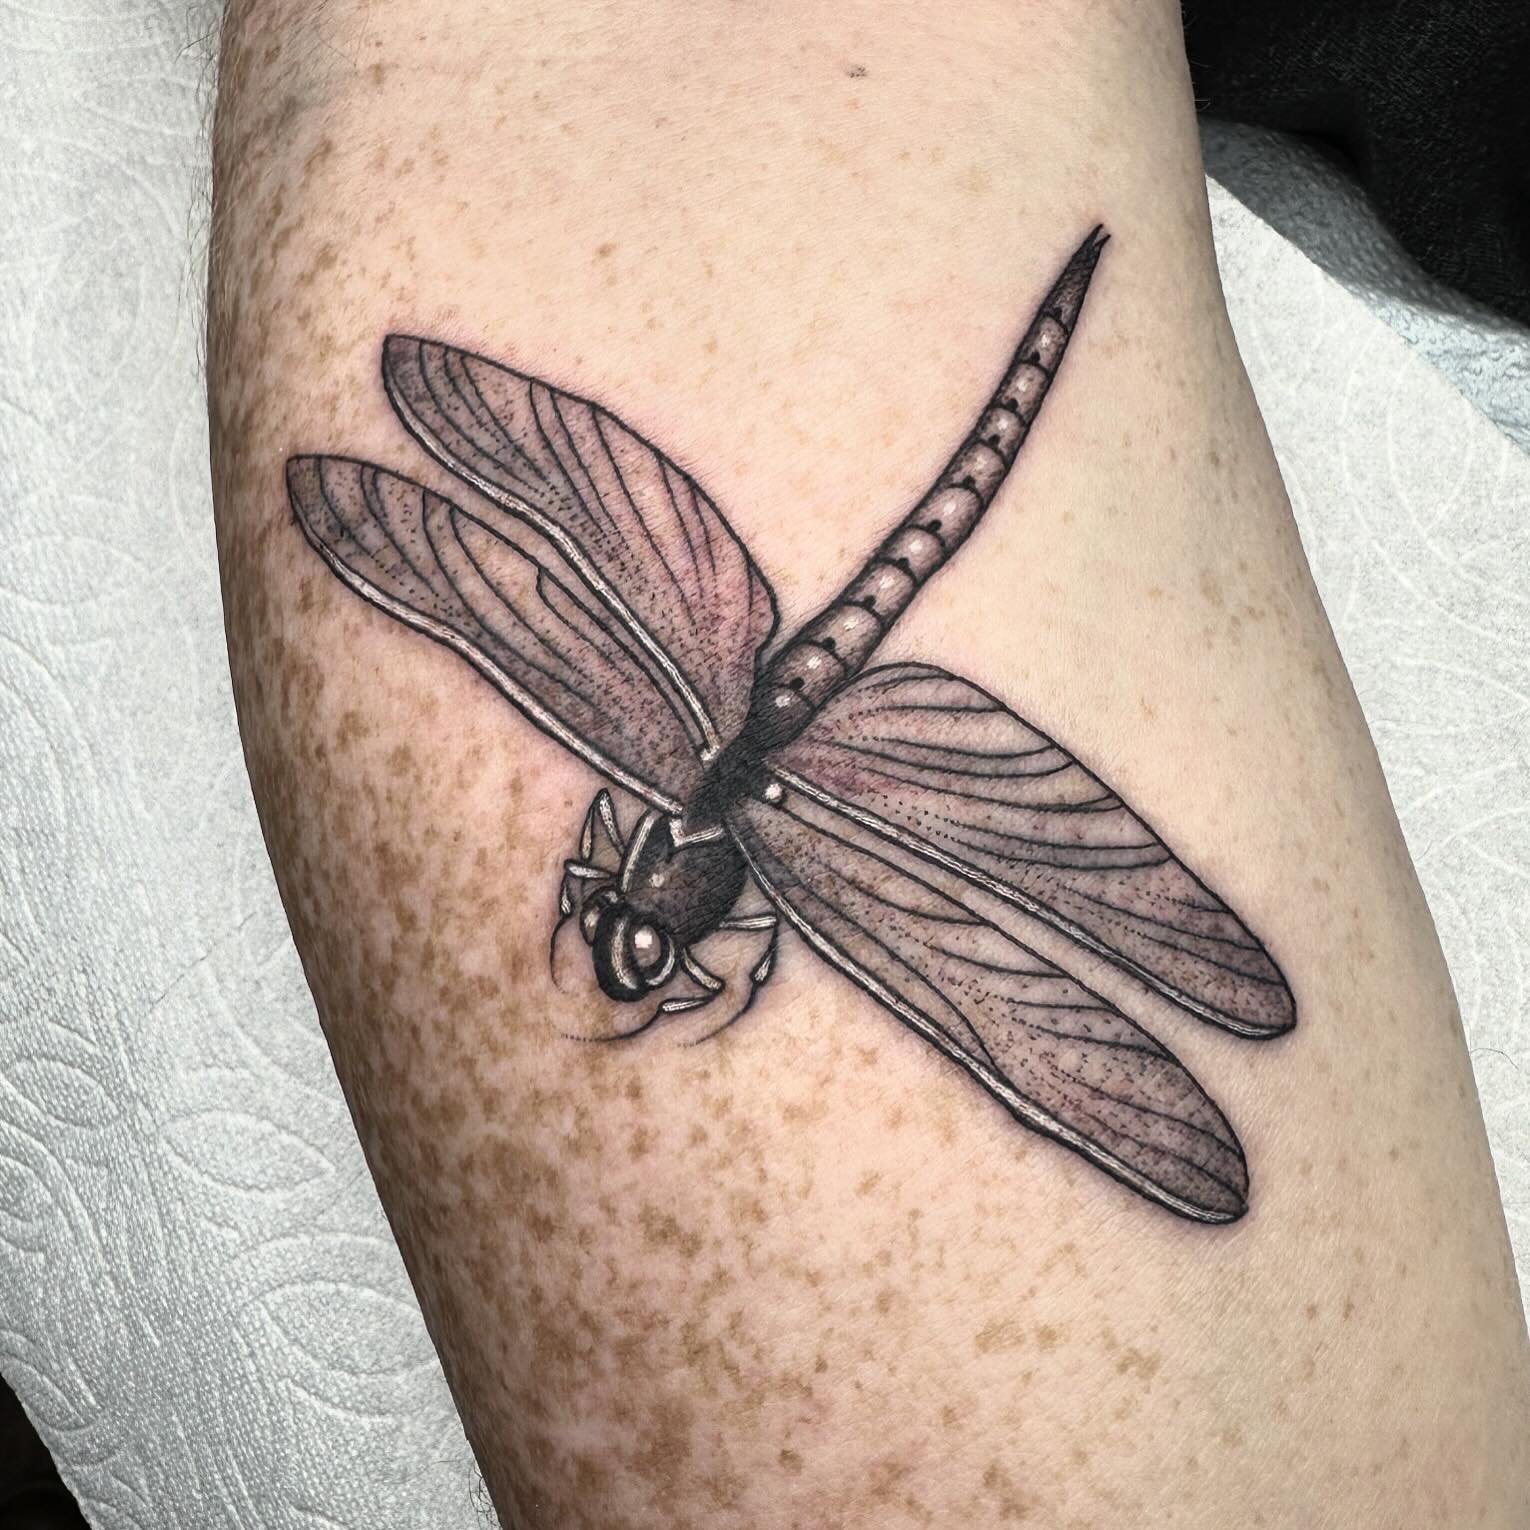 Dragonfly by Mike @tattoosbymikec !!
He has time to tattoo you today, come see us! 

&bull;
&bull;
&bull;
&bull;
&bull;
&bull;
#tenthousandwavestattoo #shermanoakstattoo #losangelestattoo #tattoo